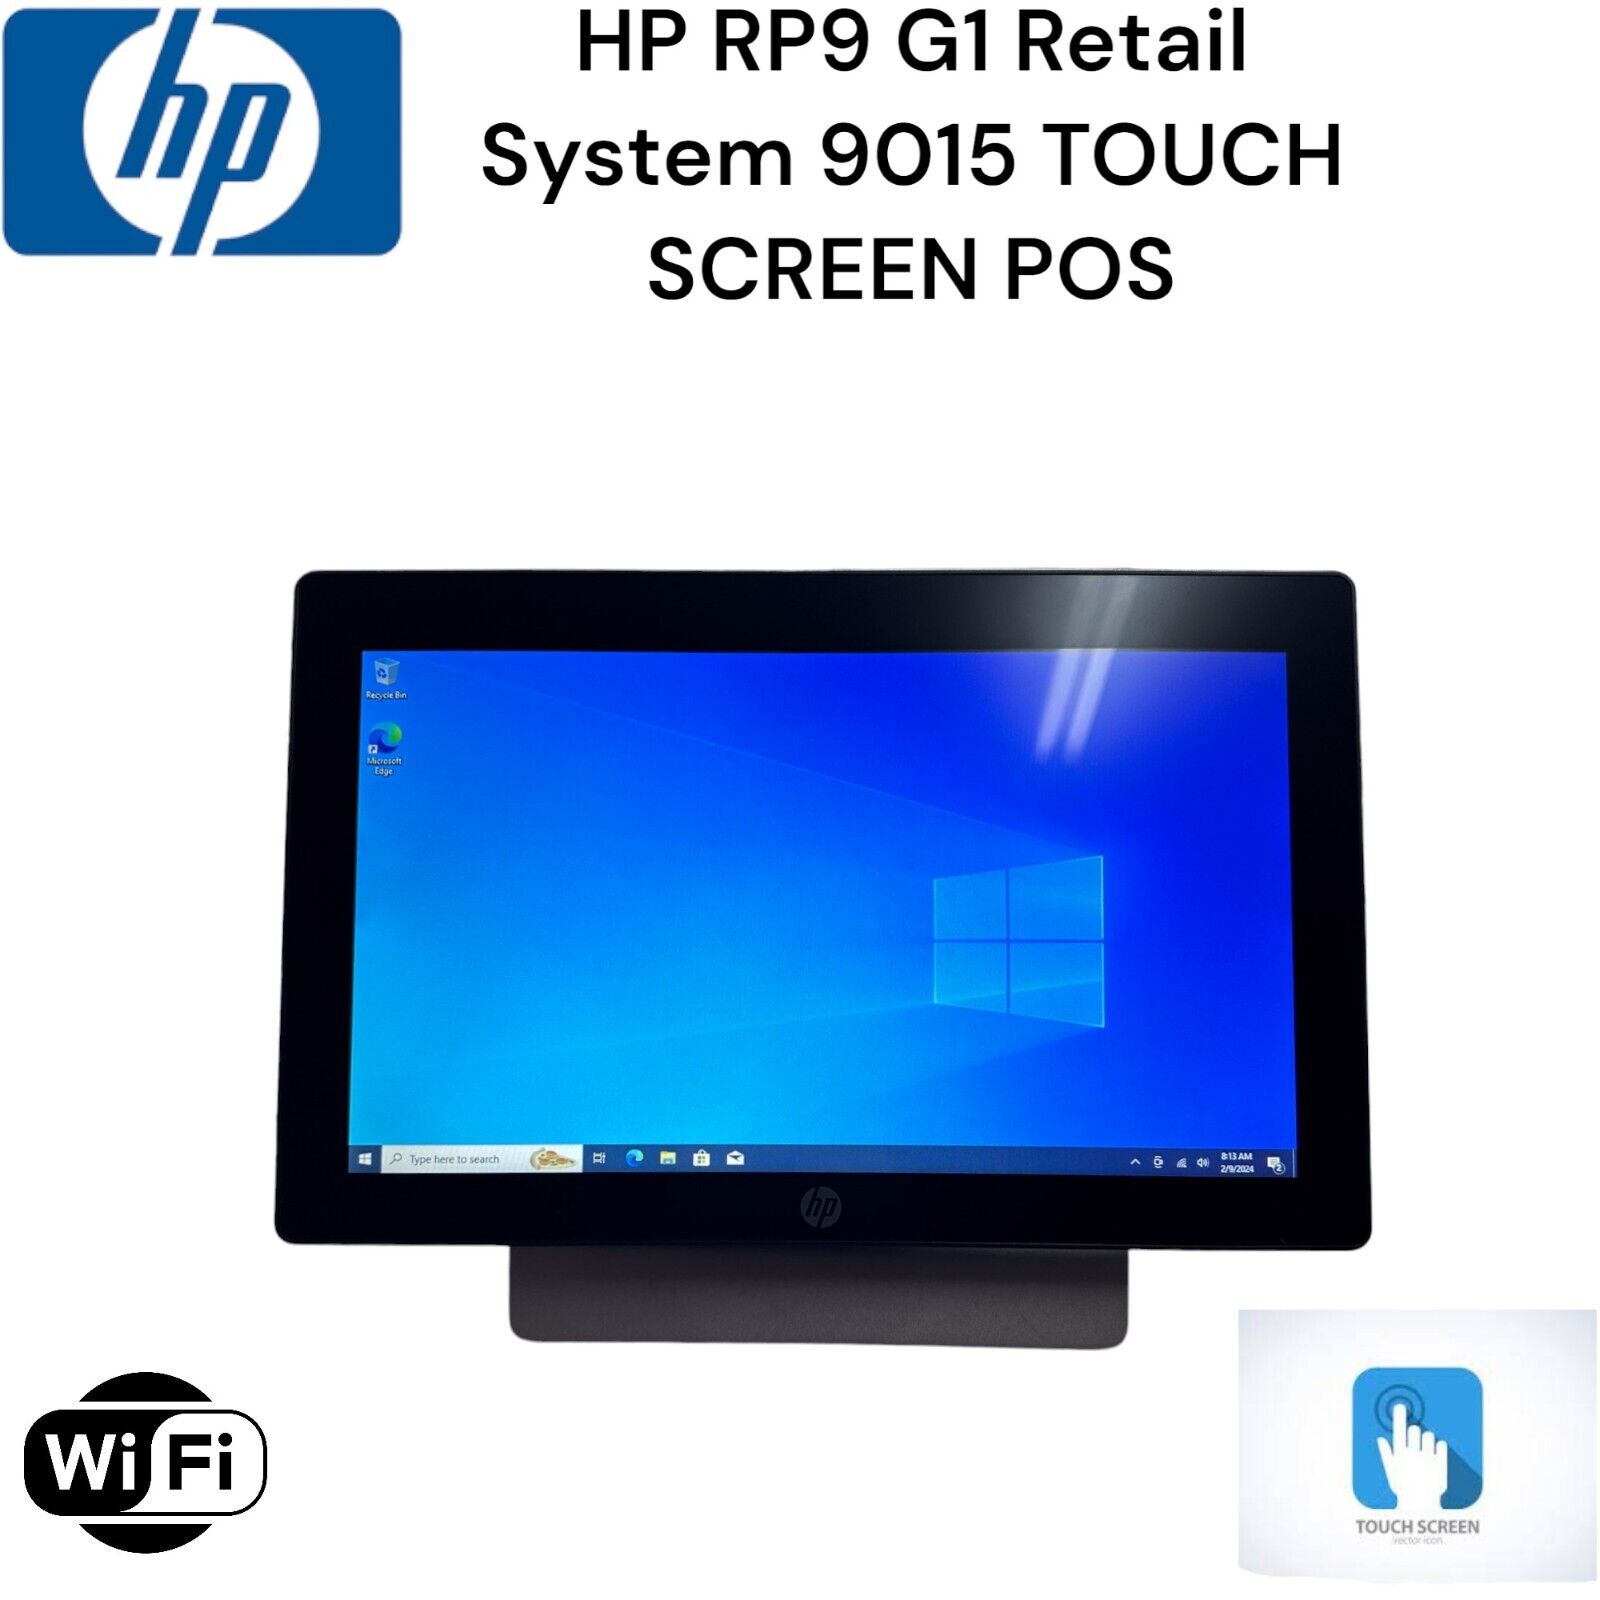 HP RP9 G1 Retail System 9015  I5 8GB 128GB M.2 SSD TOUCH SCREEN POS WIN 10 PRO